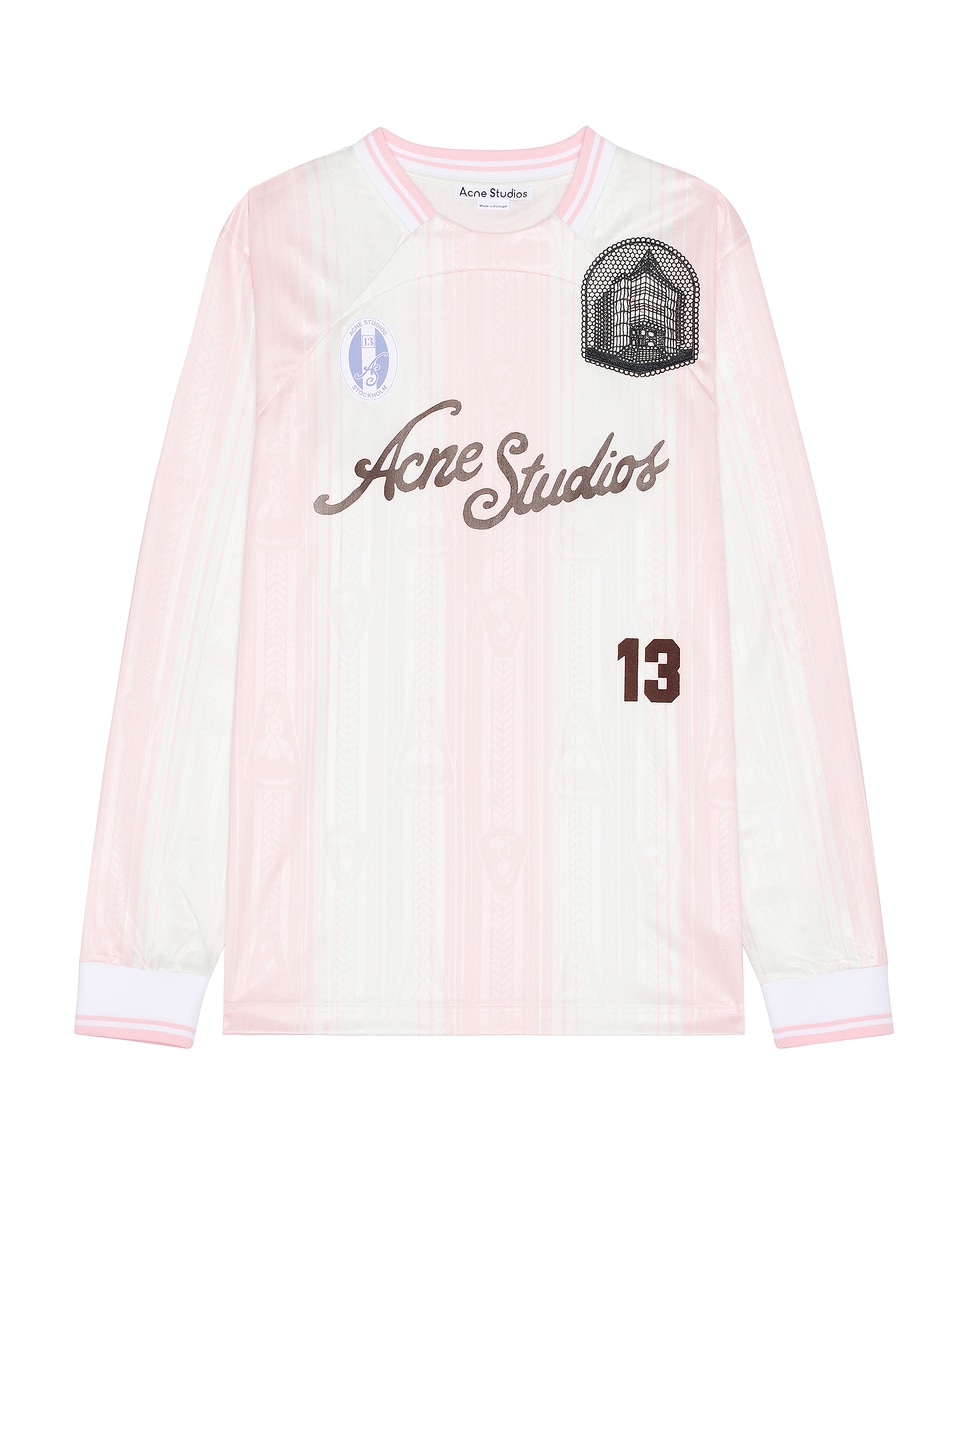 Image 1 of Acne Studios Jersey in Pink & White